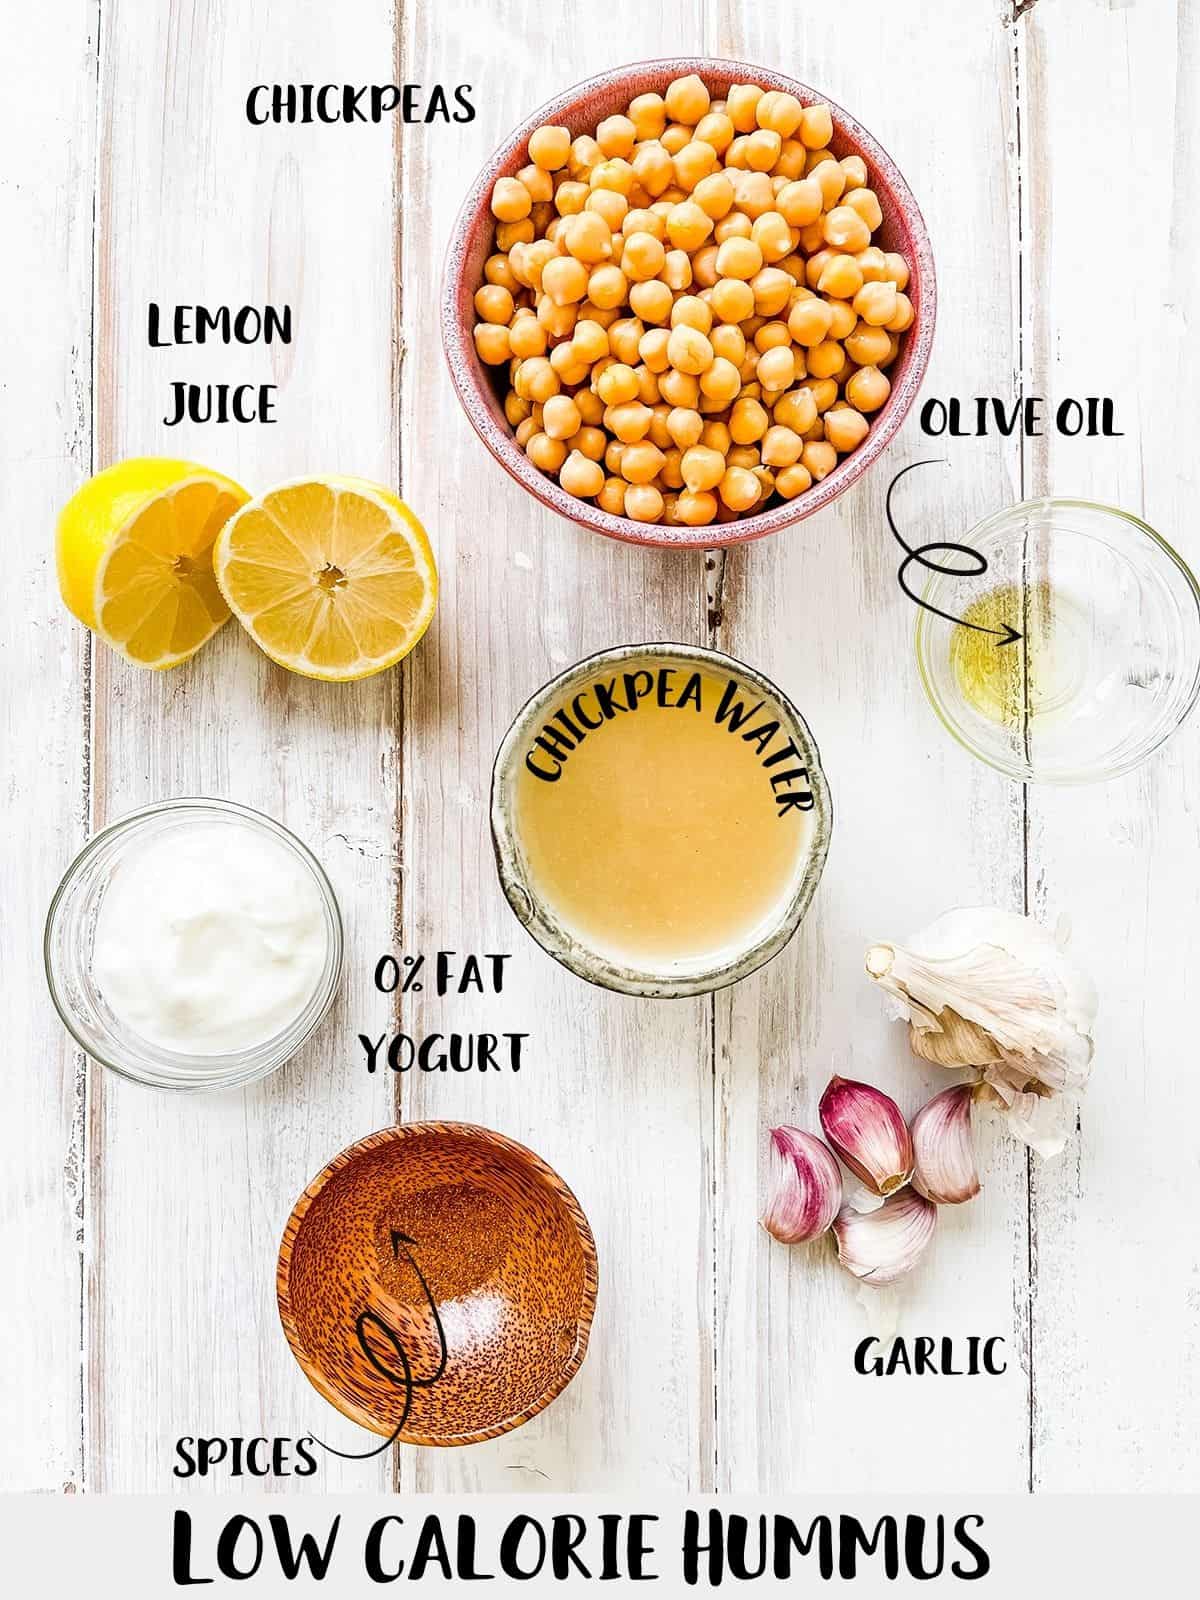 The ingredients needed to make hummus in dishes on a white wooden table.